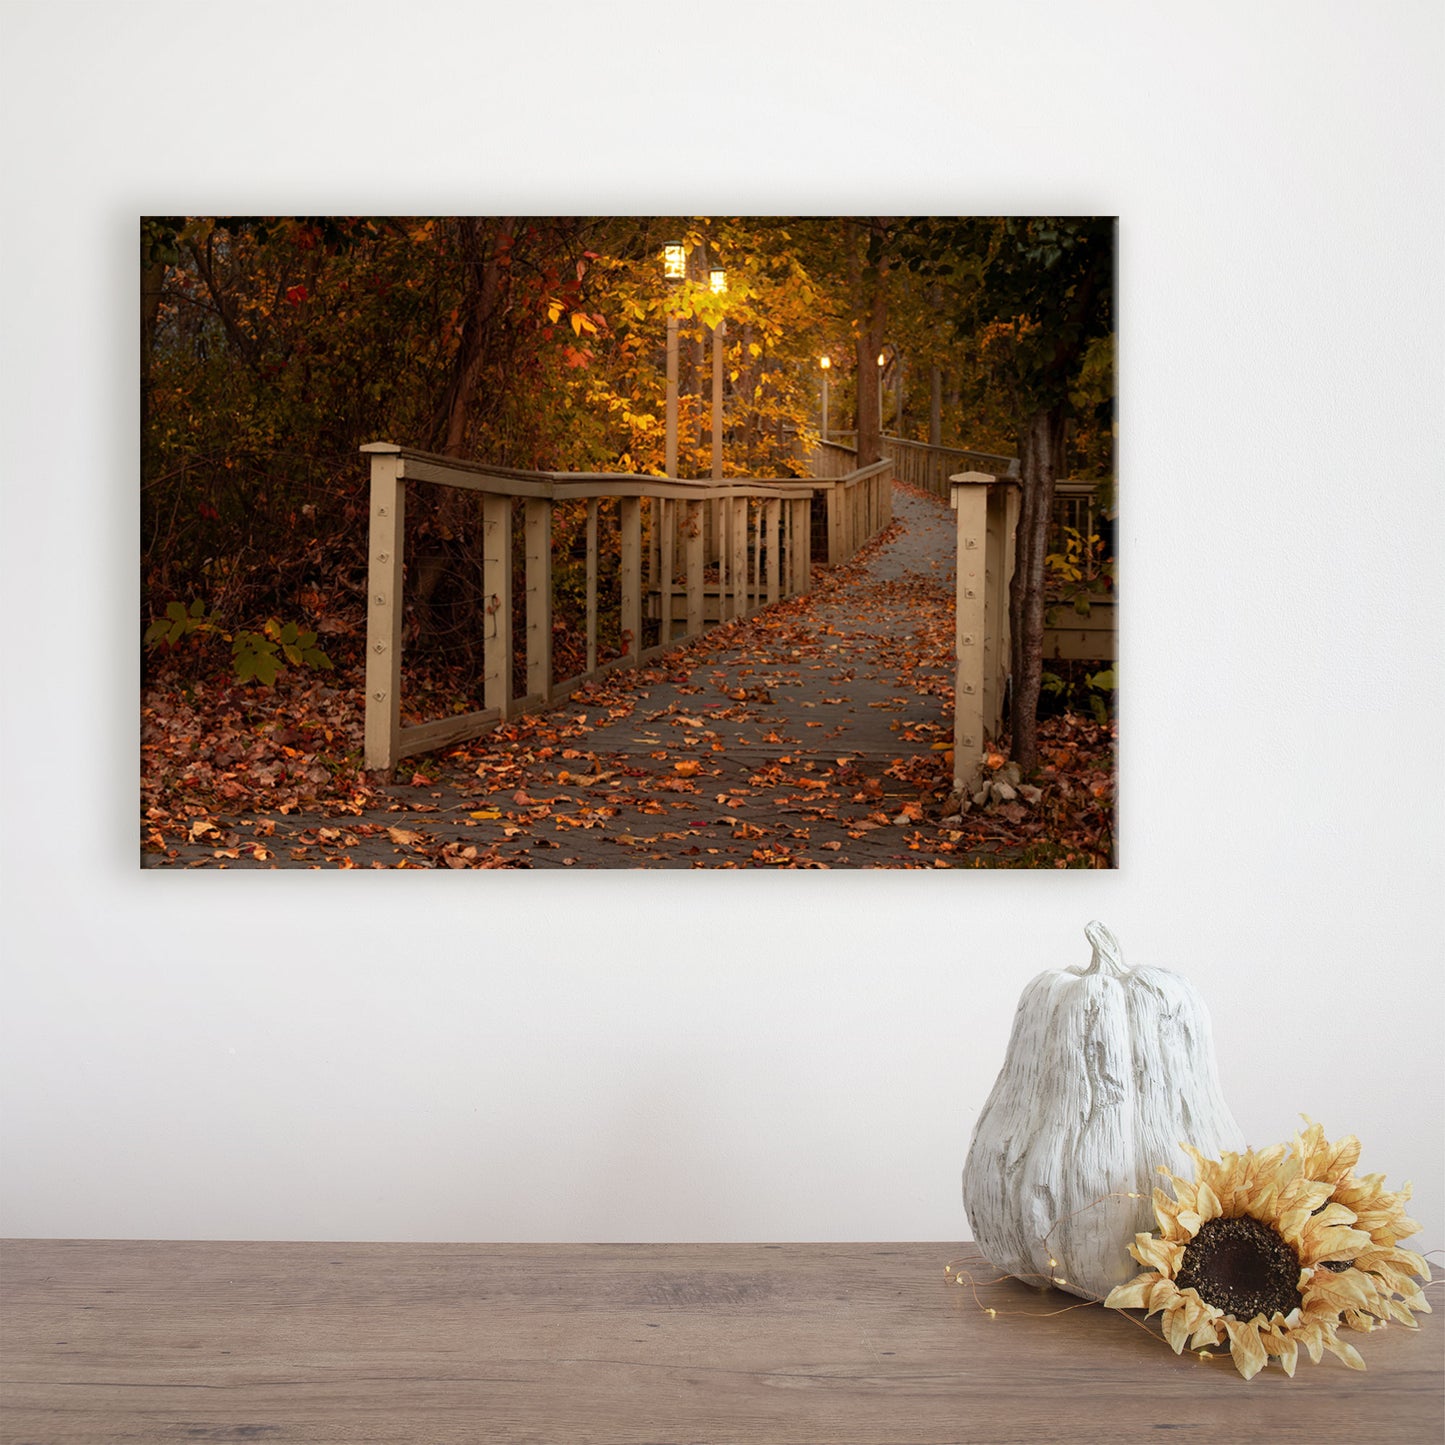 This art piece displays the Woodlawn Beach boardwalk bathed in the soft glow of dawn and surrounded by fall leaves, serving as both versatile wall art and seasonal living room decor for autumn.